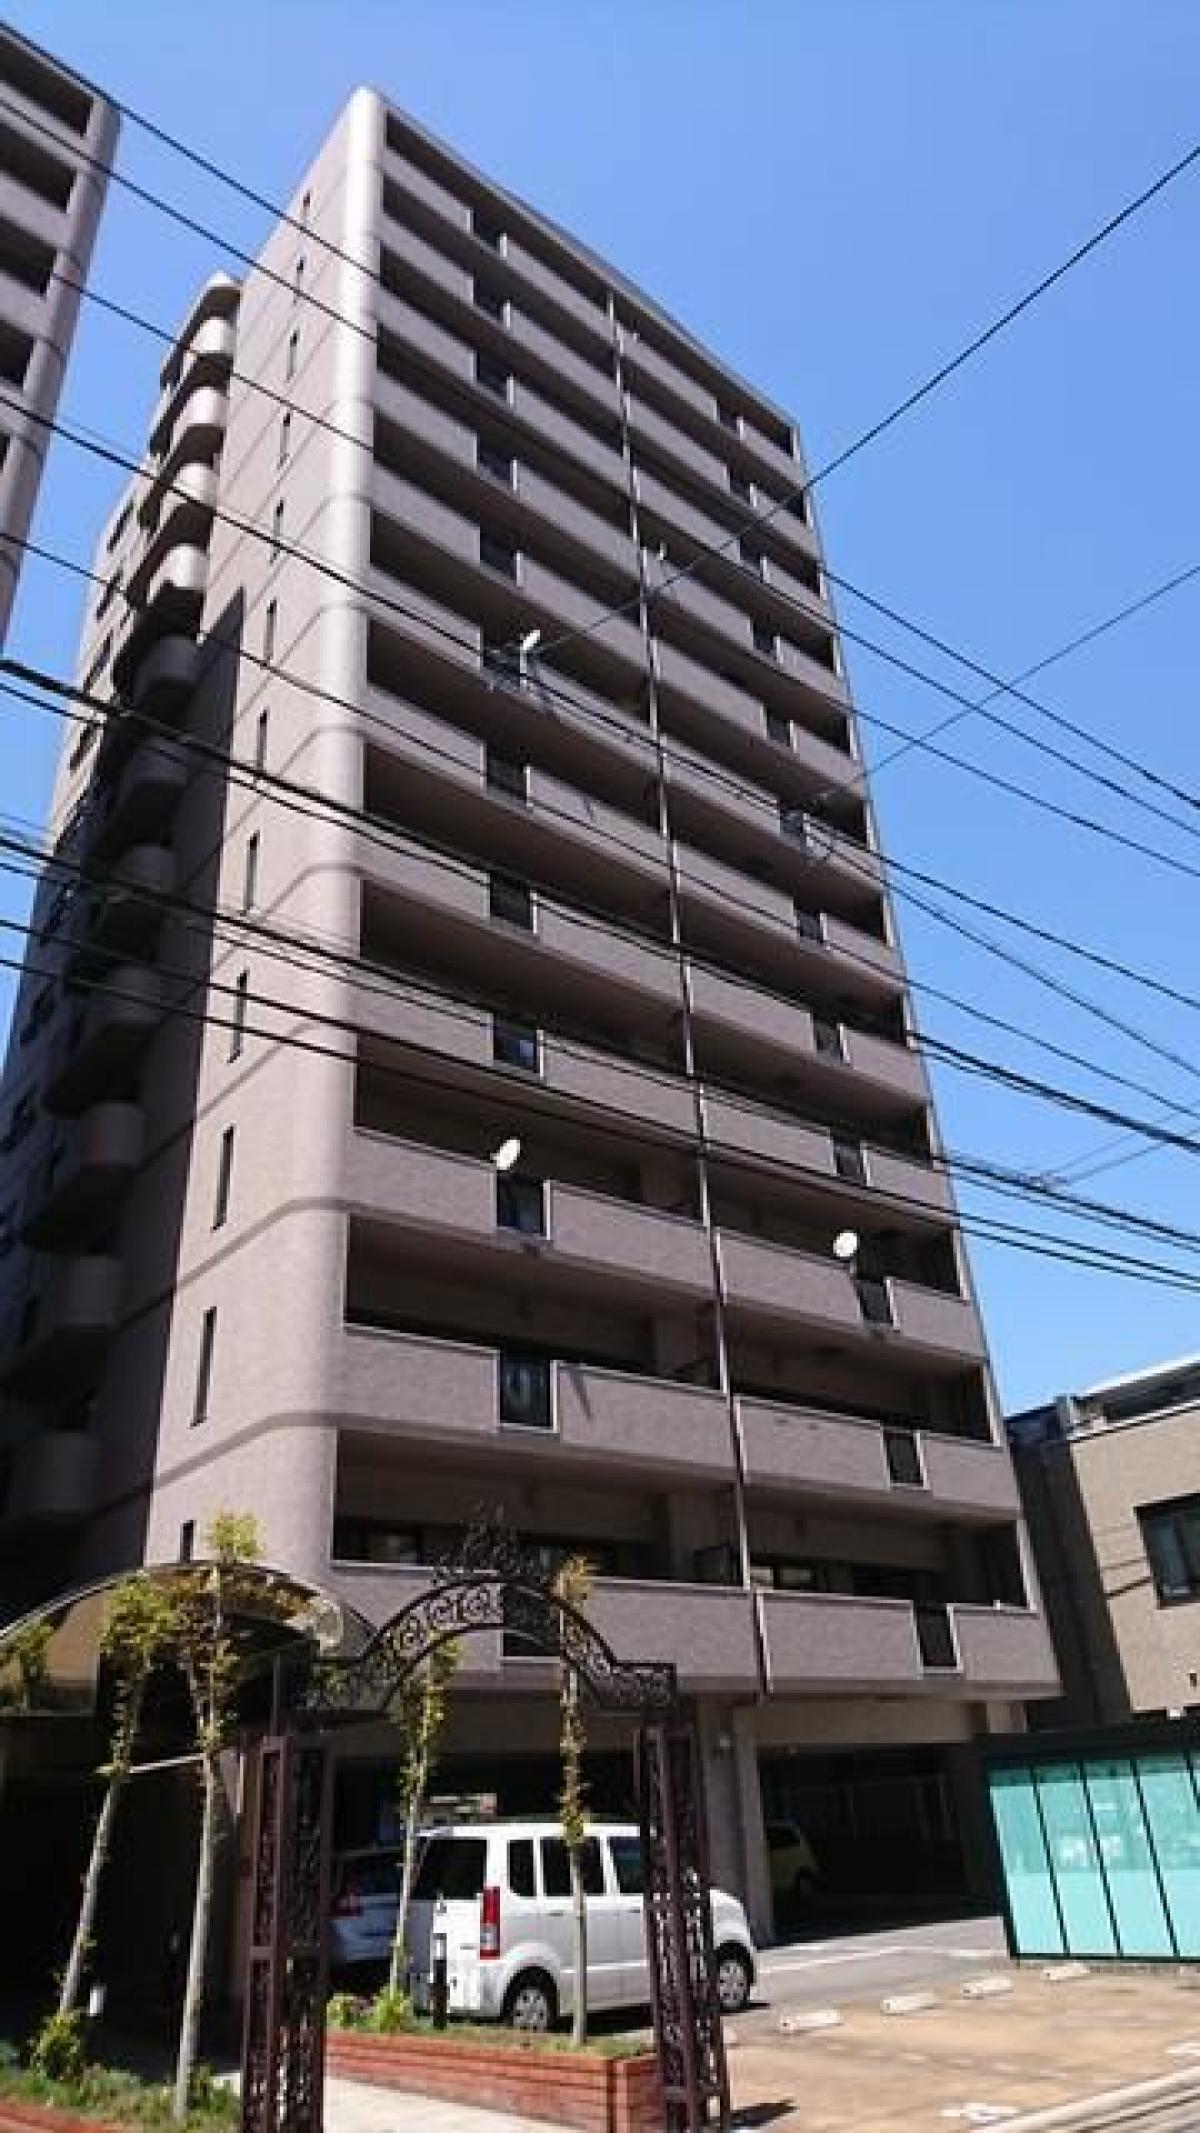 Picture of Apartment For Sale in Yamaguchi Shi, Yamaguchi, Japan